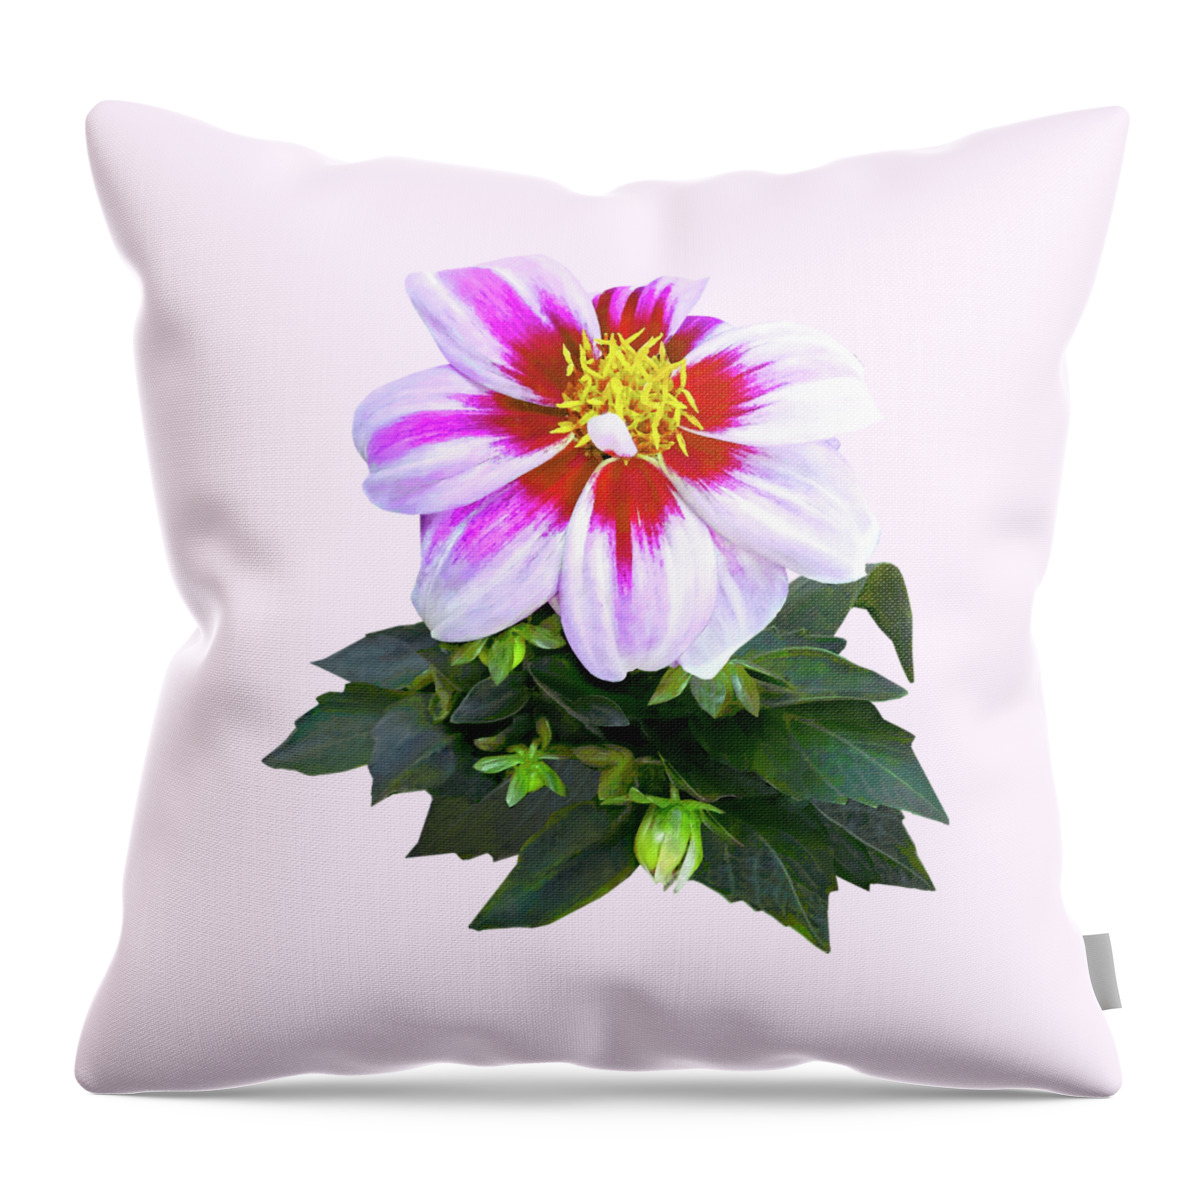 Dahlia Throw Pillow featuring the photograph Two-Toned Pink Dahlia by Susan Savad